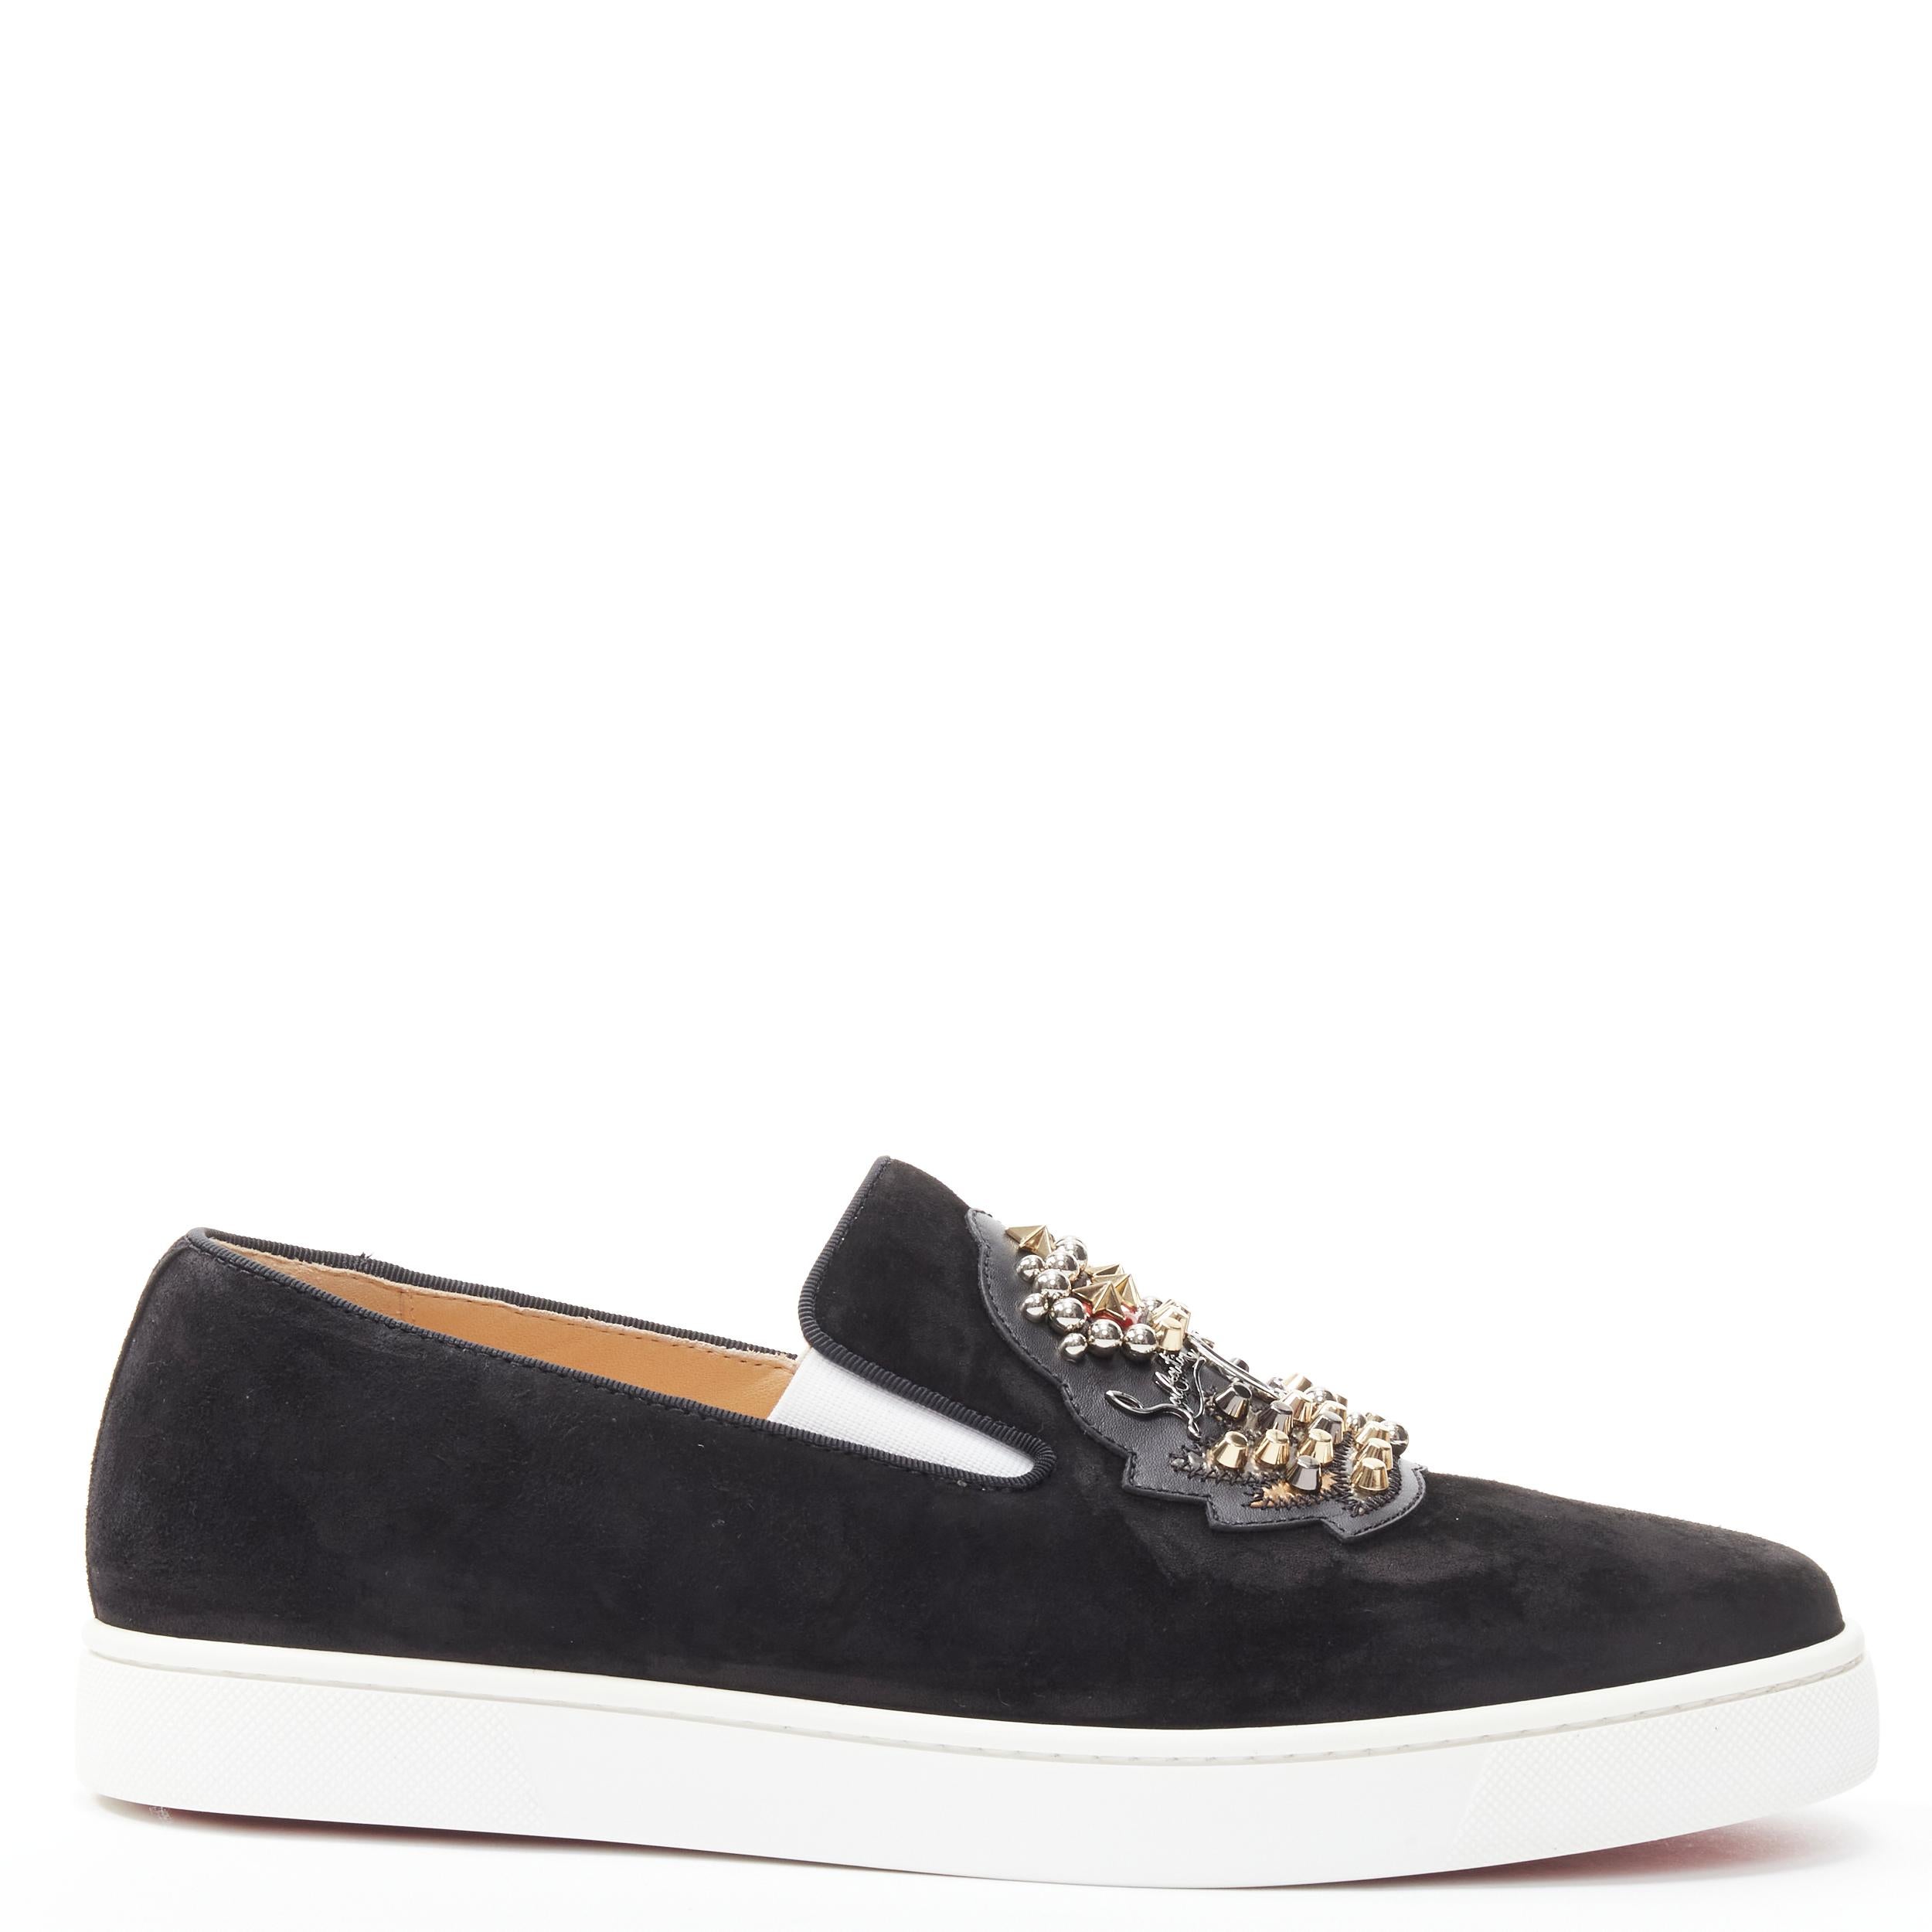 new CHRISTIAN LOUBOUTIN Pik Boat CL crest studded black suede sneaker EU40.5 
Reference: TGAS/B01847 
Brand: Christian Louboutin 
Designer: Christian Louboutin 
Model: Pik Boat 
Material: Suede 
Color: Black 
Pattern: Solid 
Extra Detail: Stud CL